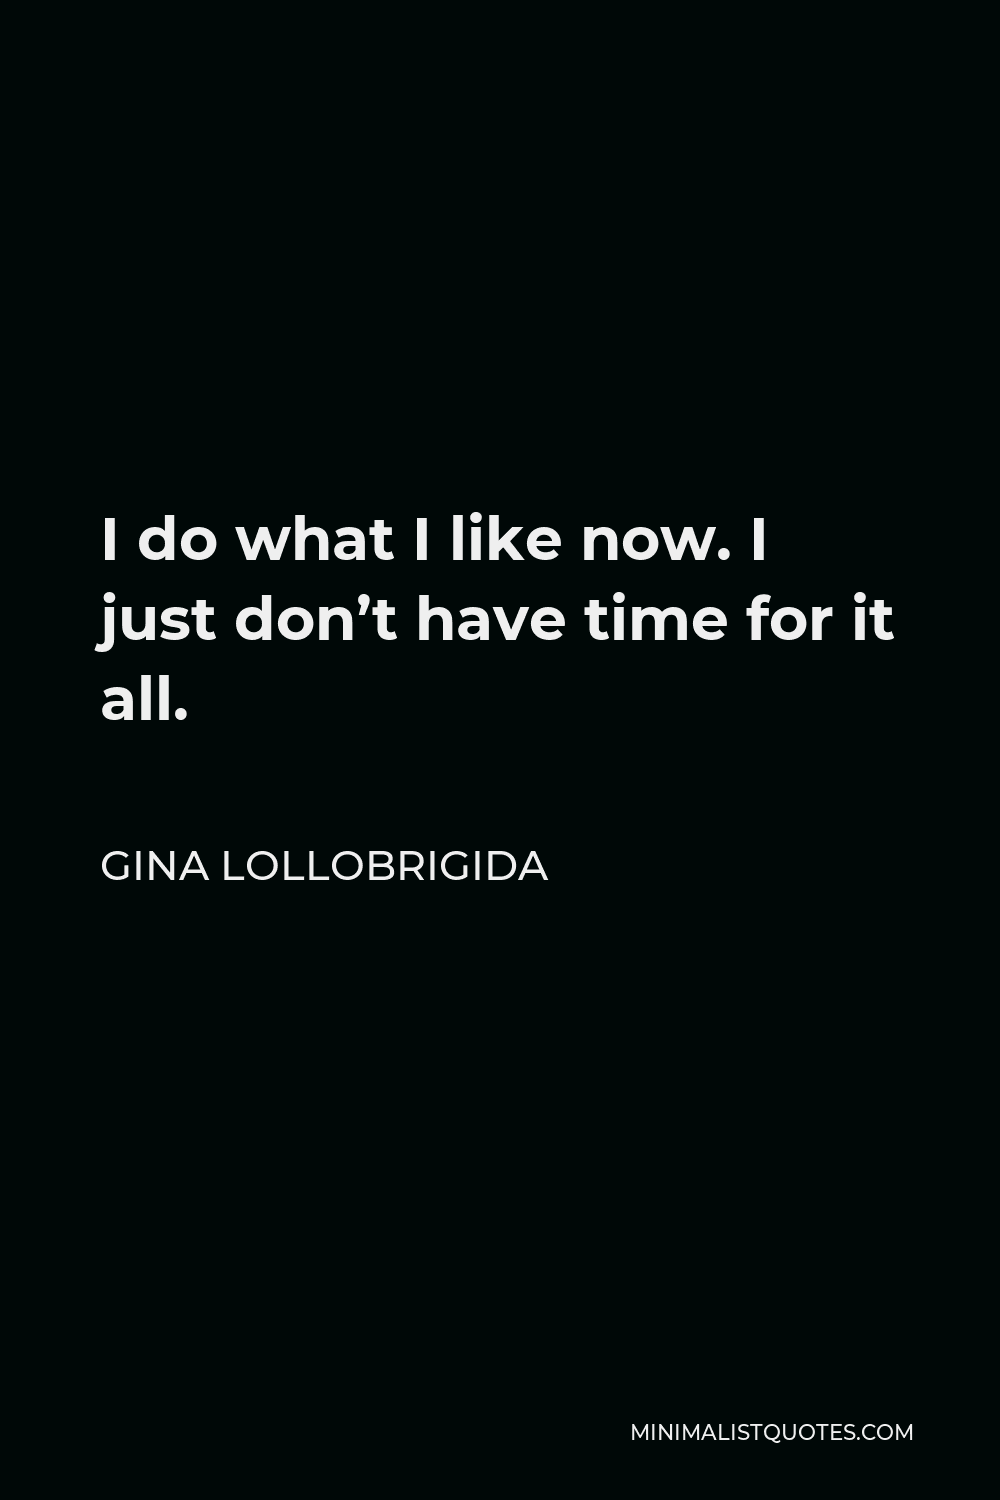 Gina Lollobrigida Quote - I do what I like now. I just don’t have time for it all.